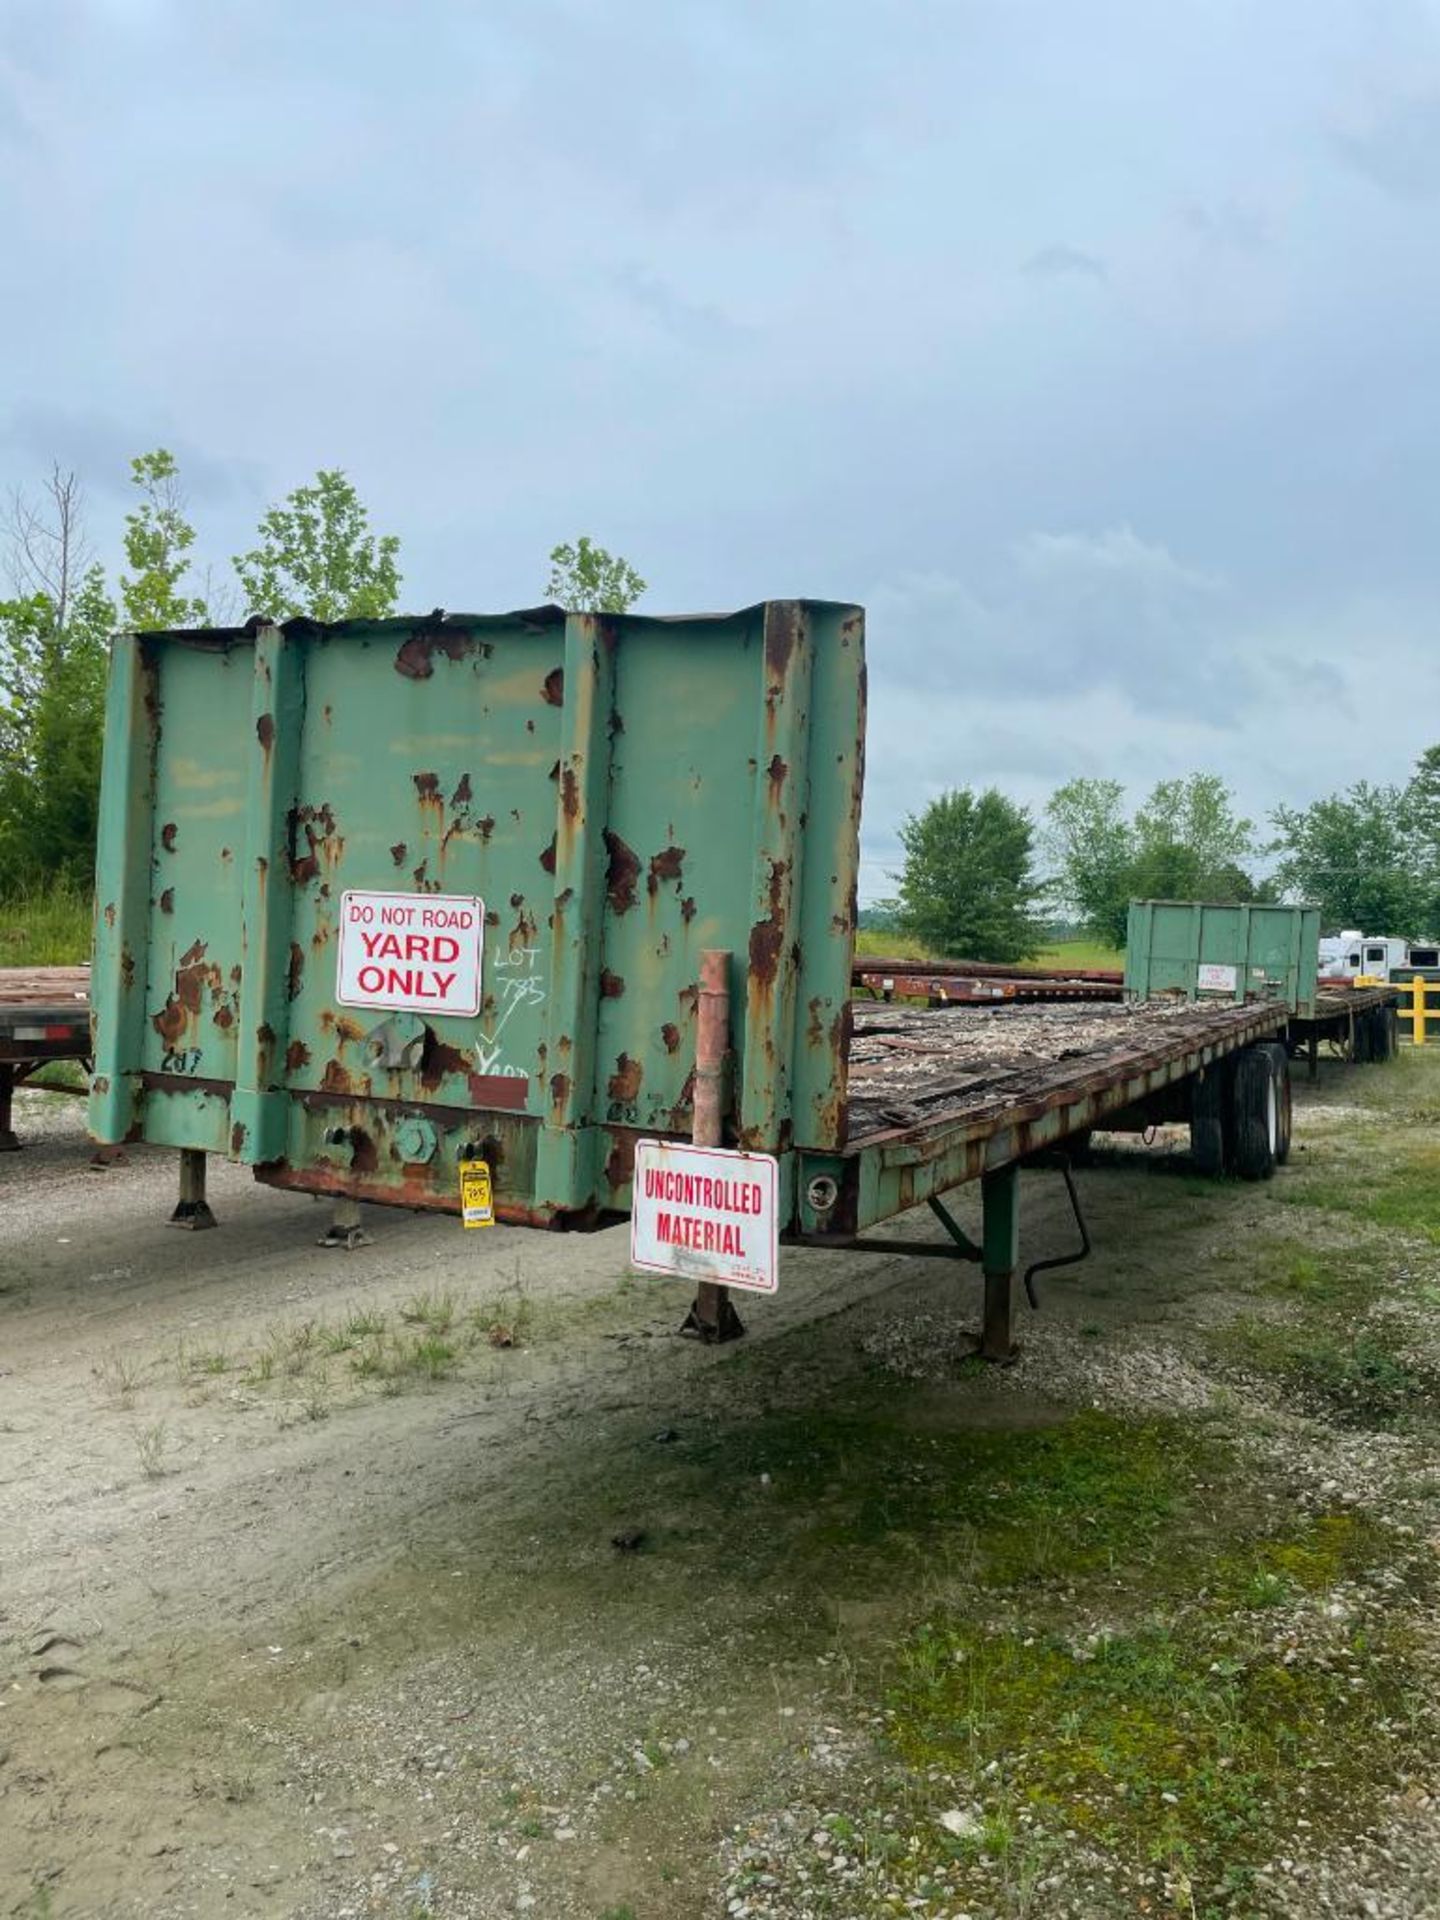 1990 FONTAINE STEEL FLATBED TRAILER, 45' WOOD DECK, DUAL TANDEM AXLE, VIN# 1A11402CCB1535614